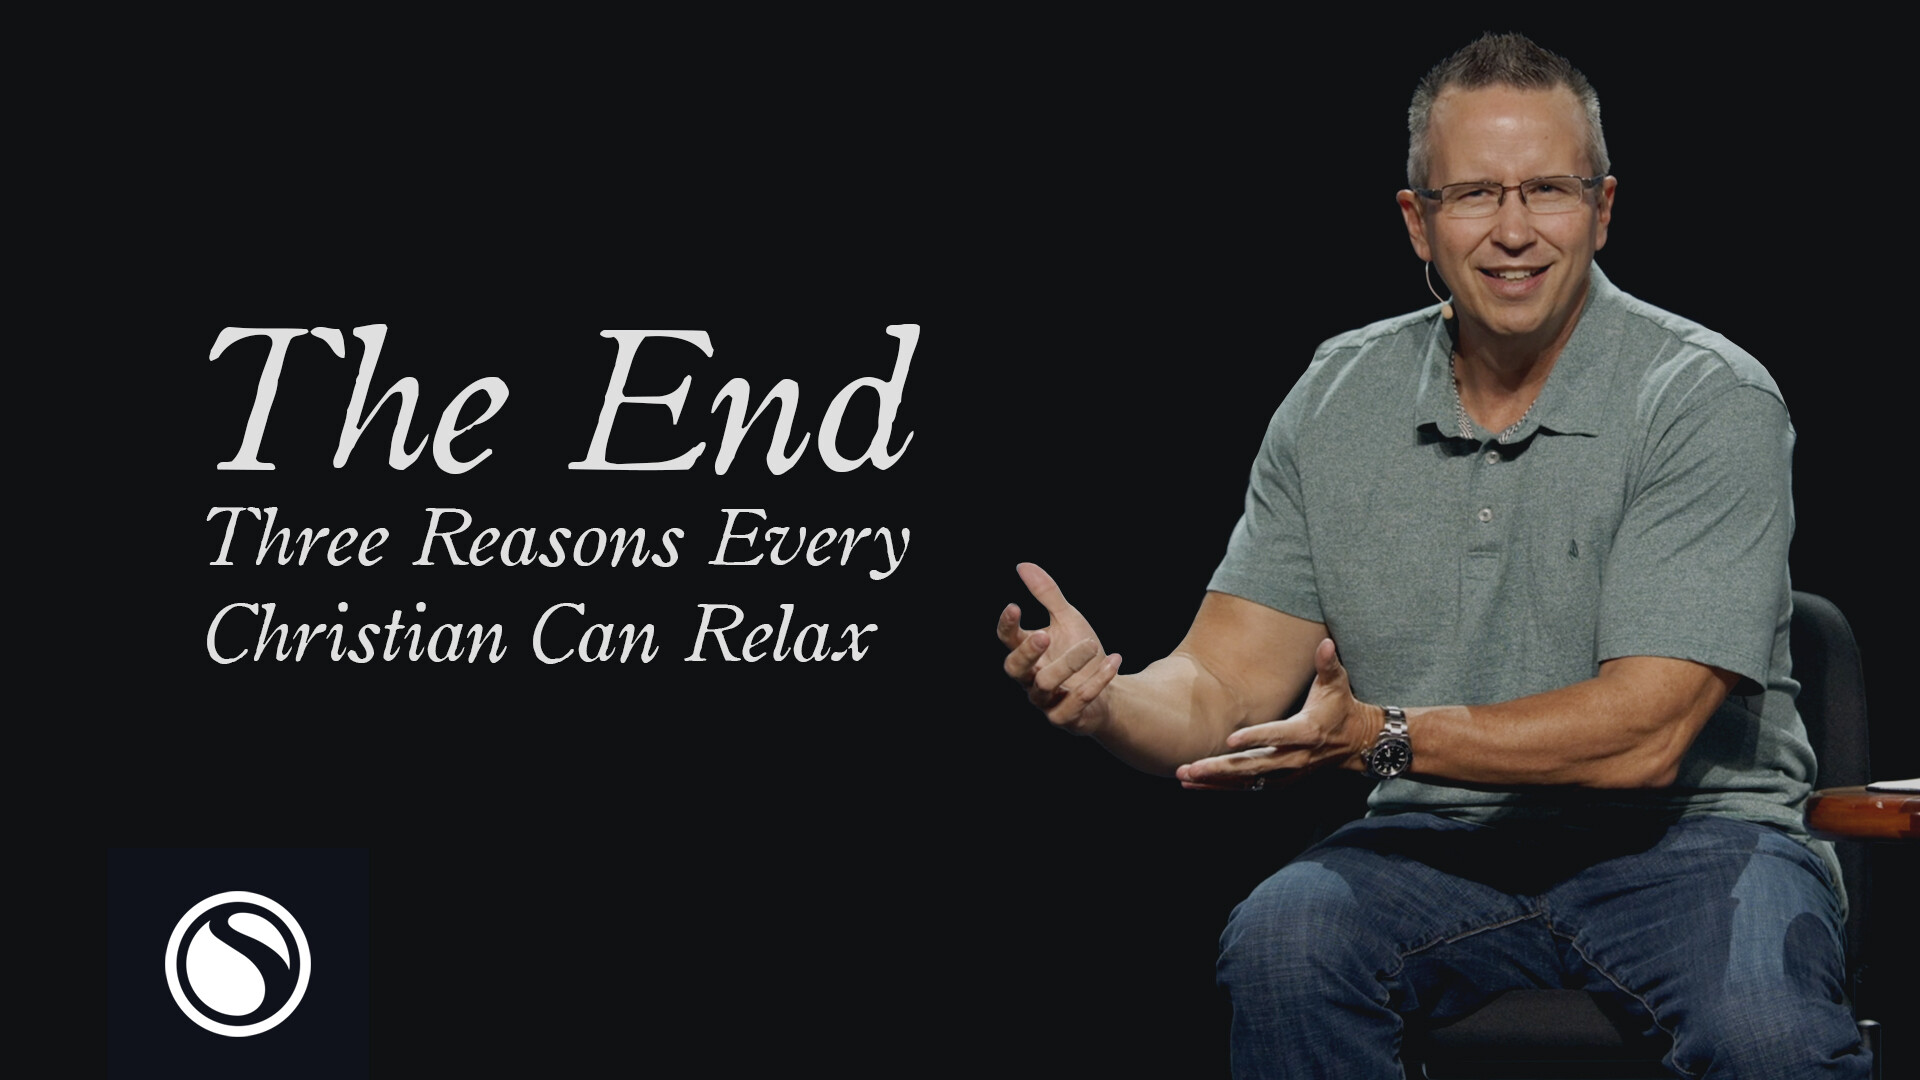 Watch The End - Three Reasons Christians Can Relax